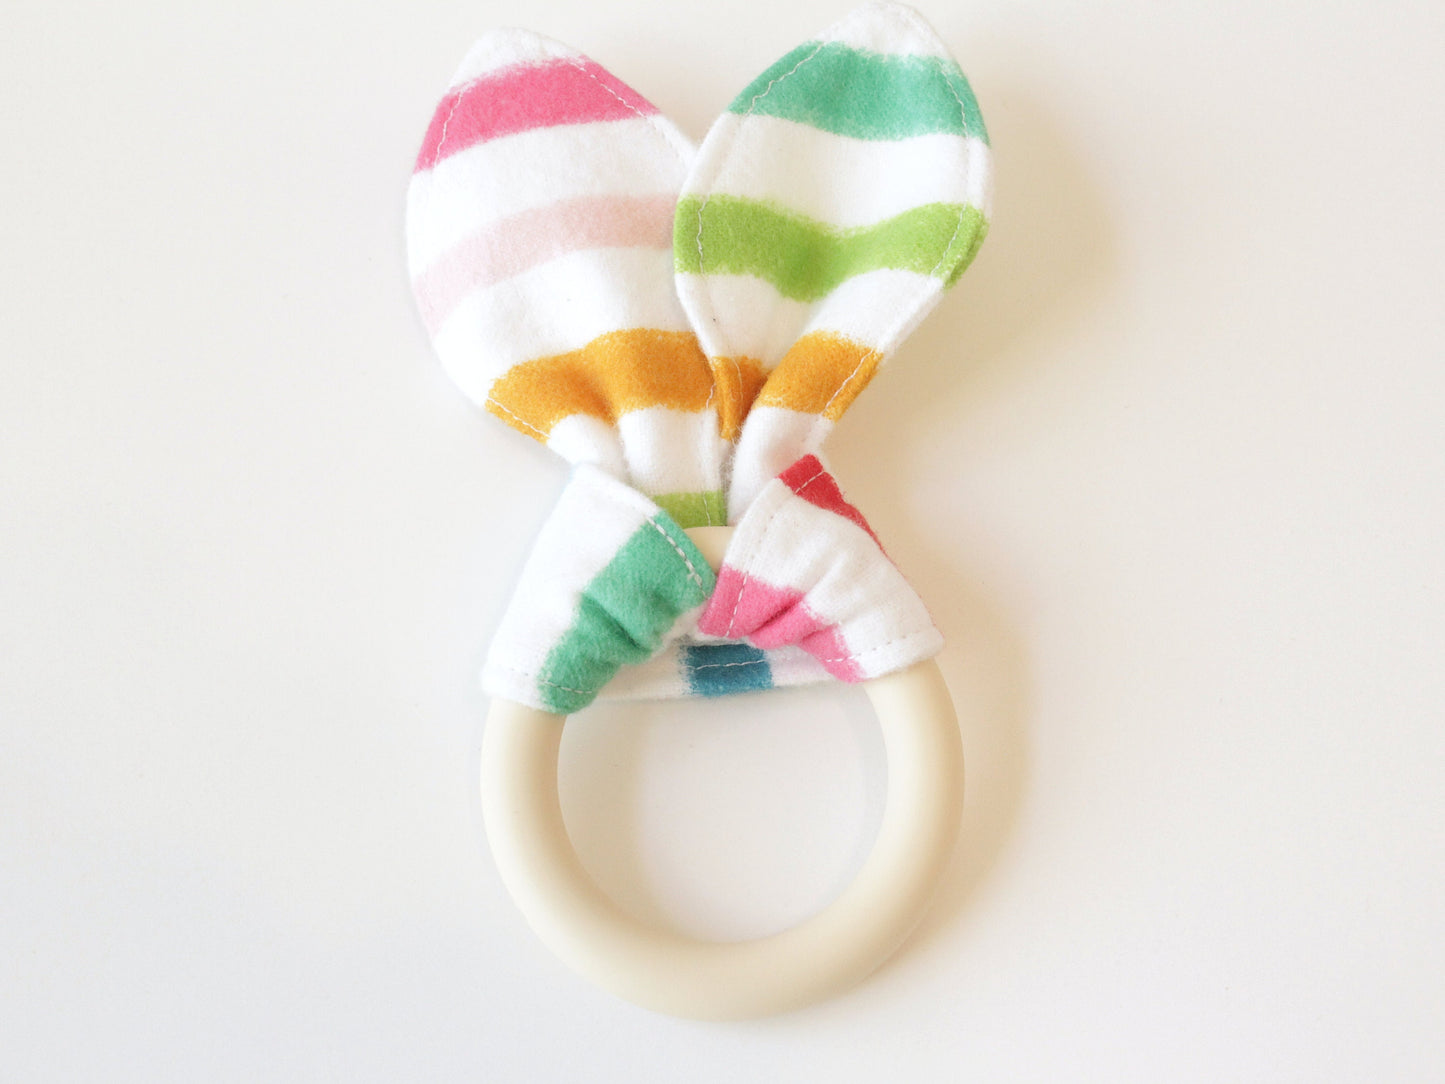 Rainbow Stripe Silicone Bunny Ear Teether | Gender Neutral Baby Shower Gift Sensory Toy | CPSC Compliant